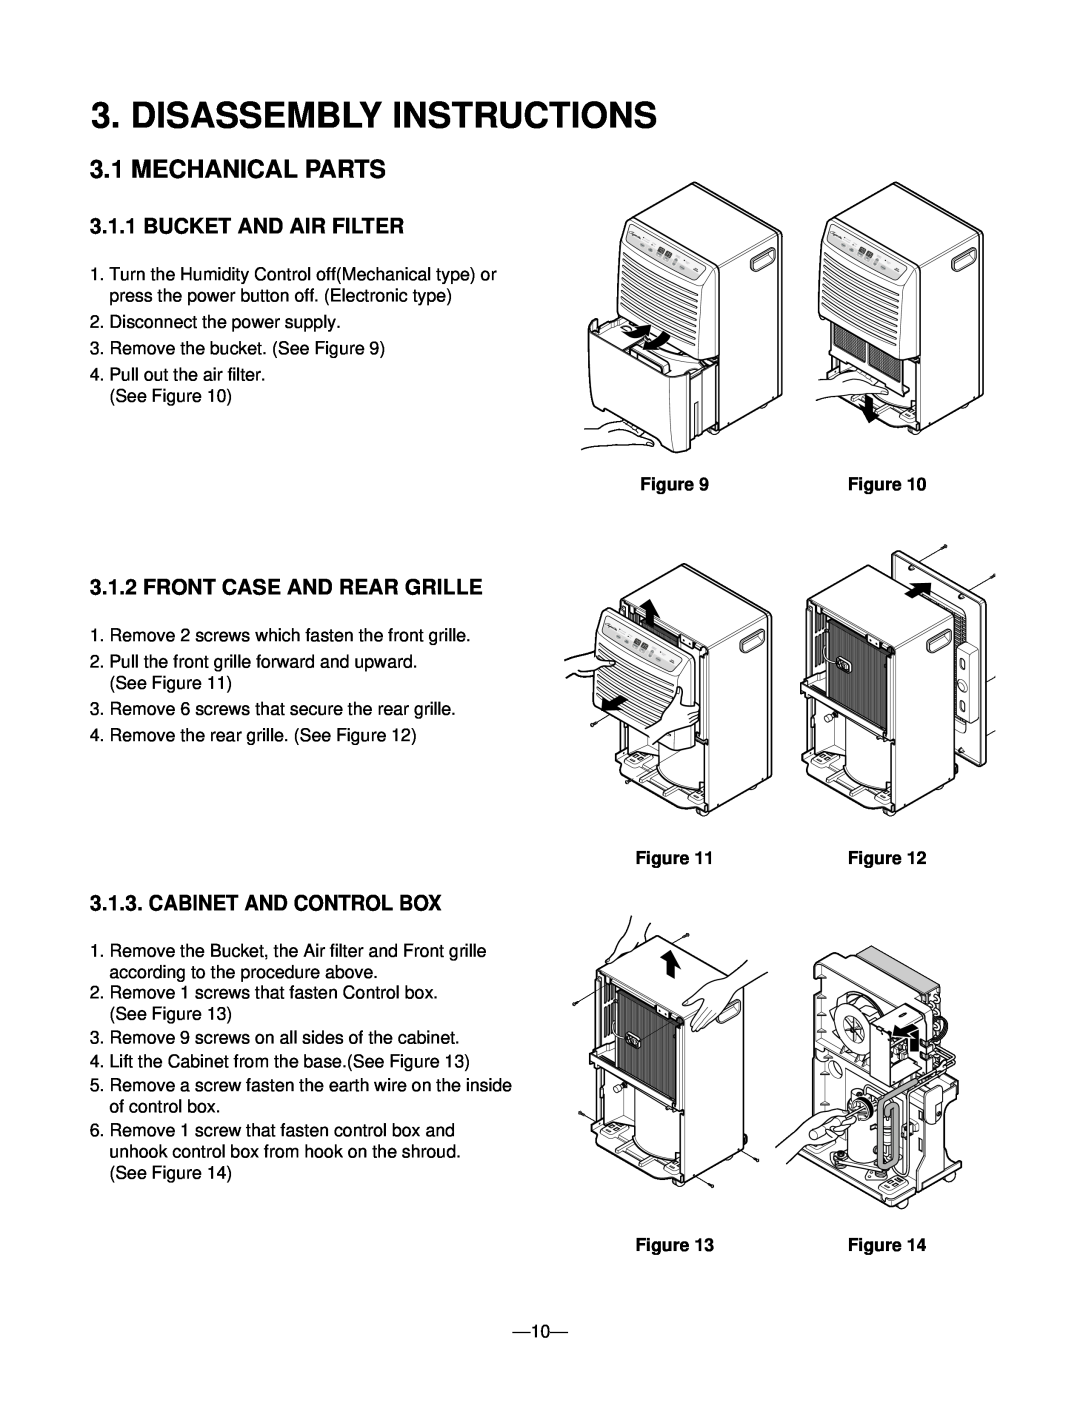 Heat Controller BHD-651-C Disassembly Instructions, Mechanical Parts, Bucket And Air Filter, Front Case And Rear Grille 